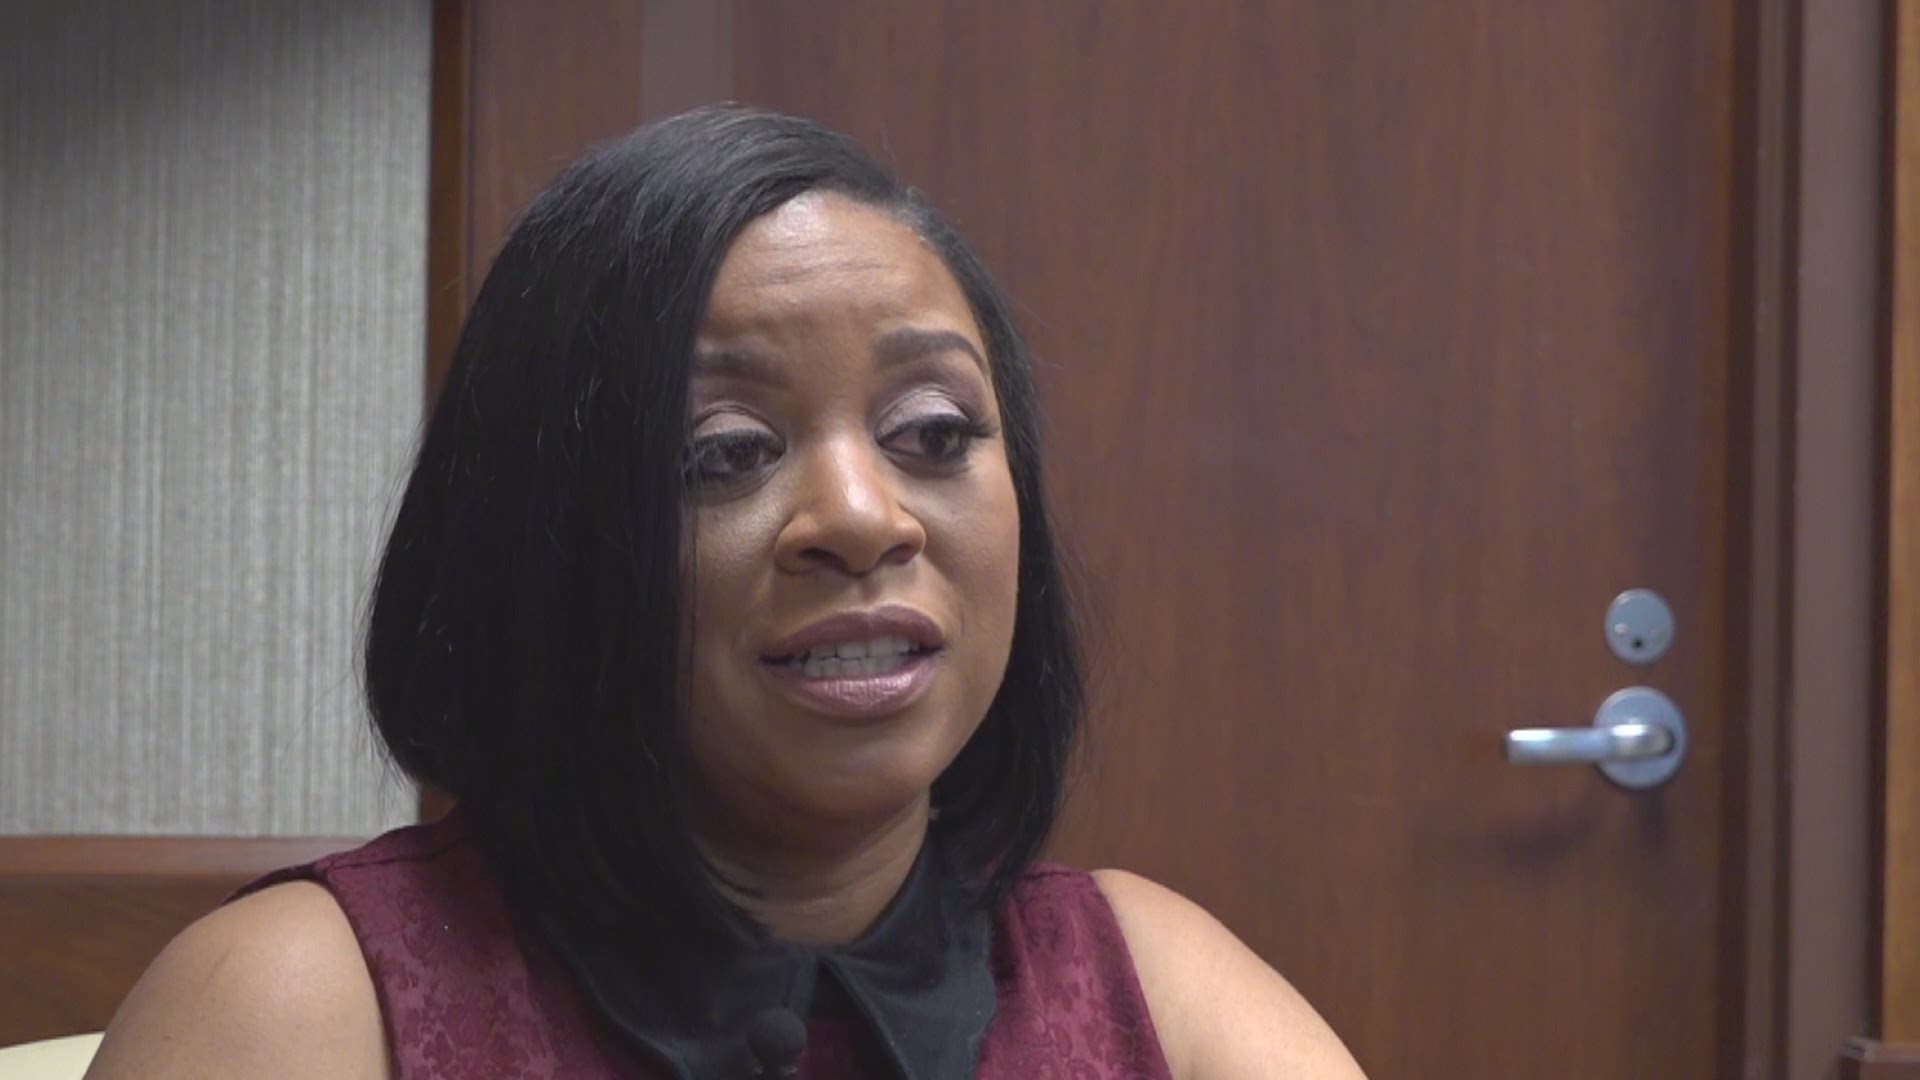 Judge Tadiya Whitner tells 11Alive why her new role is important to the Gwinnett County community.